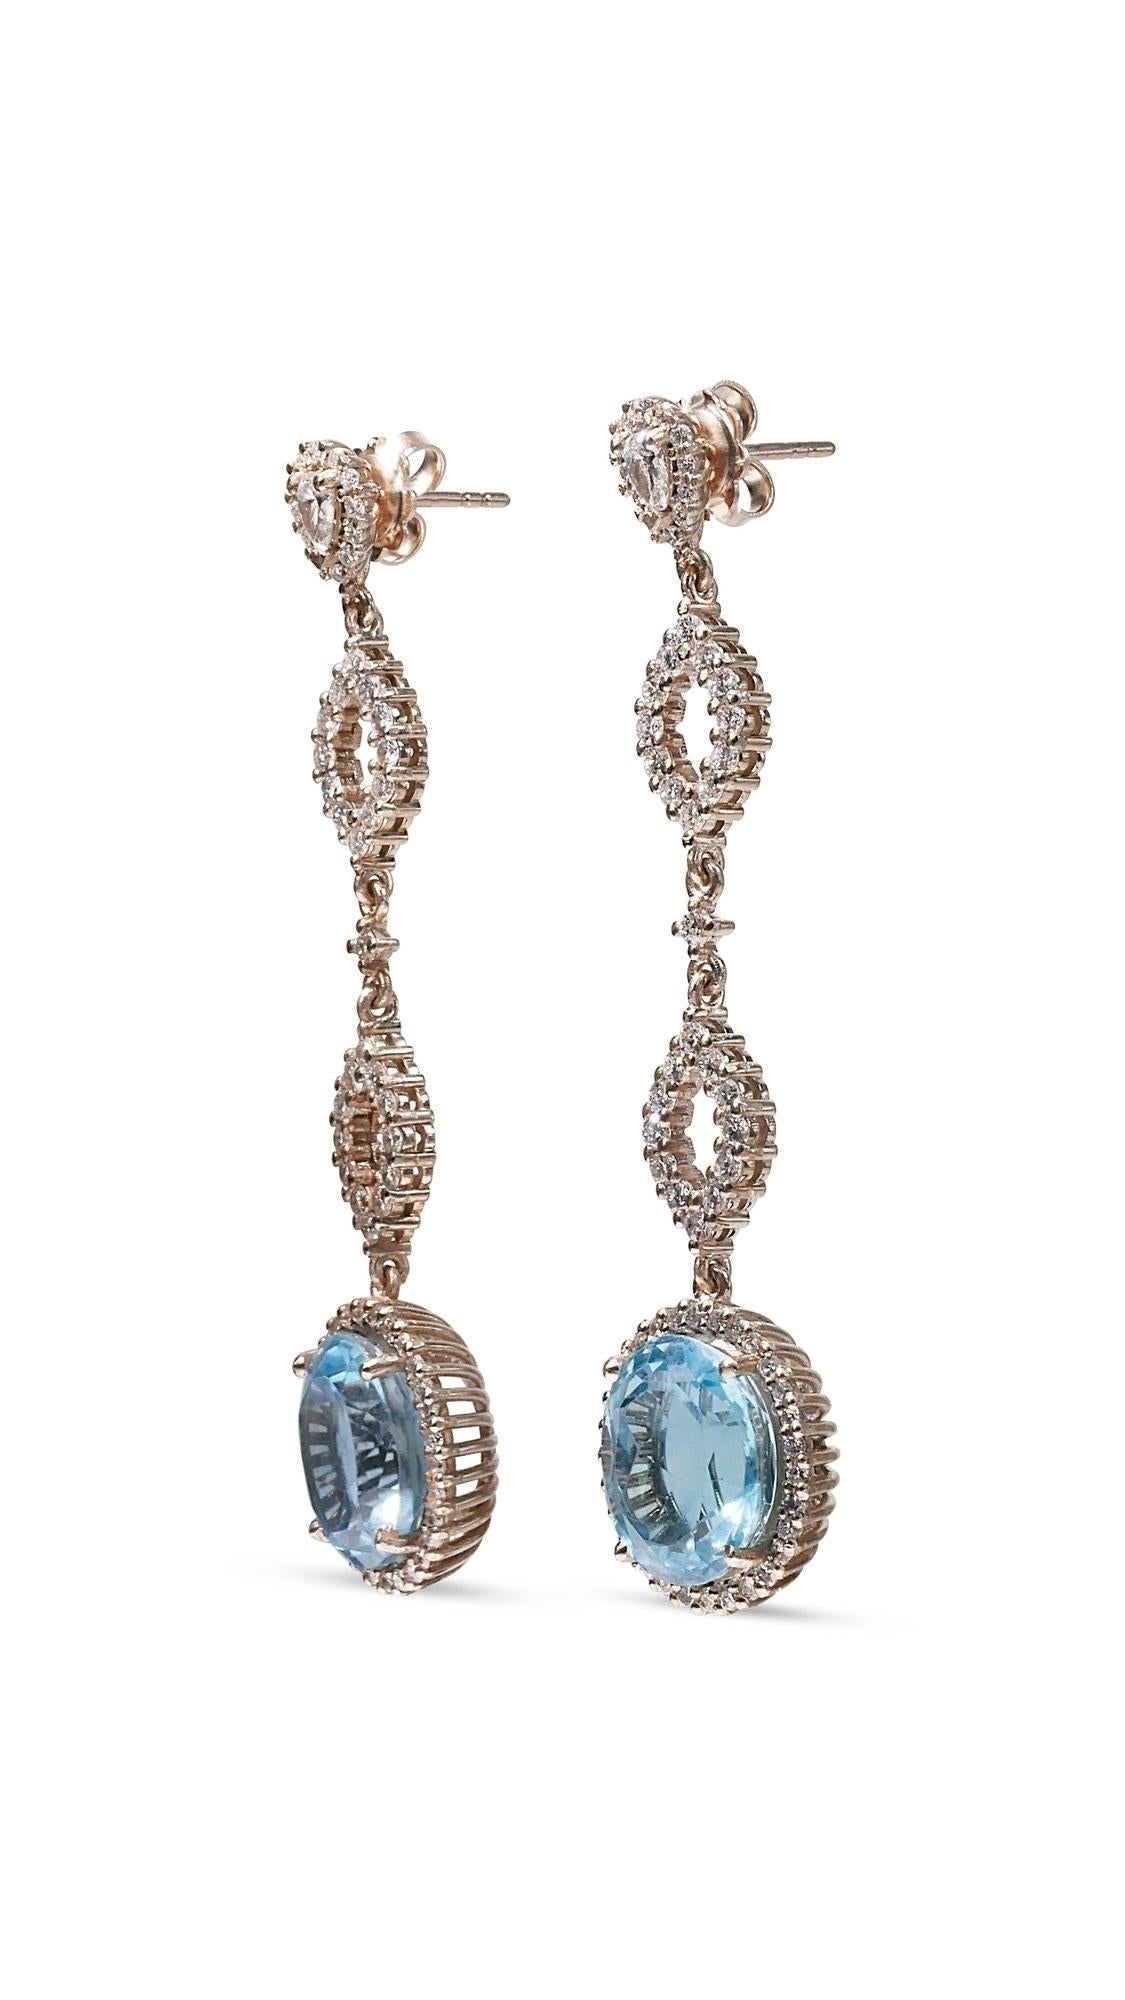 Women's 18k White Gold Drop Earrings with 17.37 ct Natural Topaz and Diamonds IGI Cert For Sale